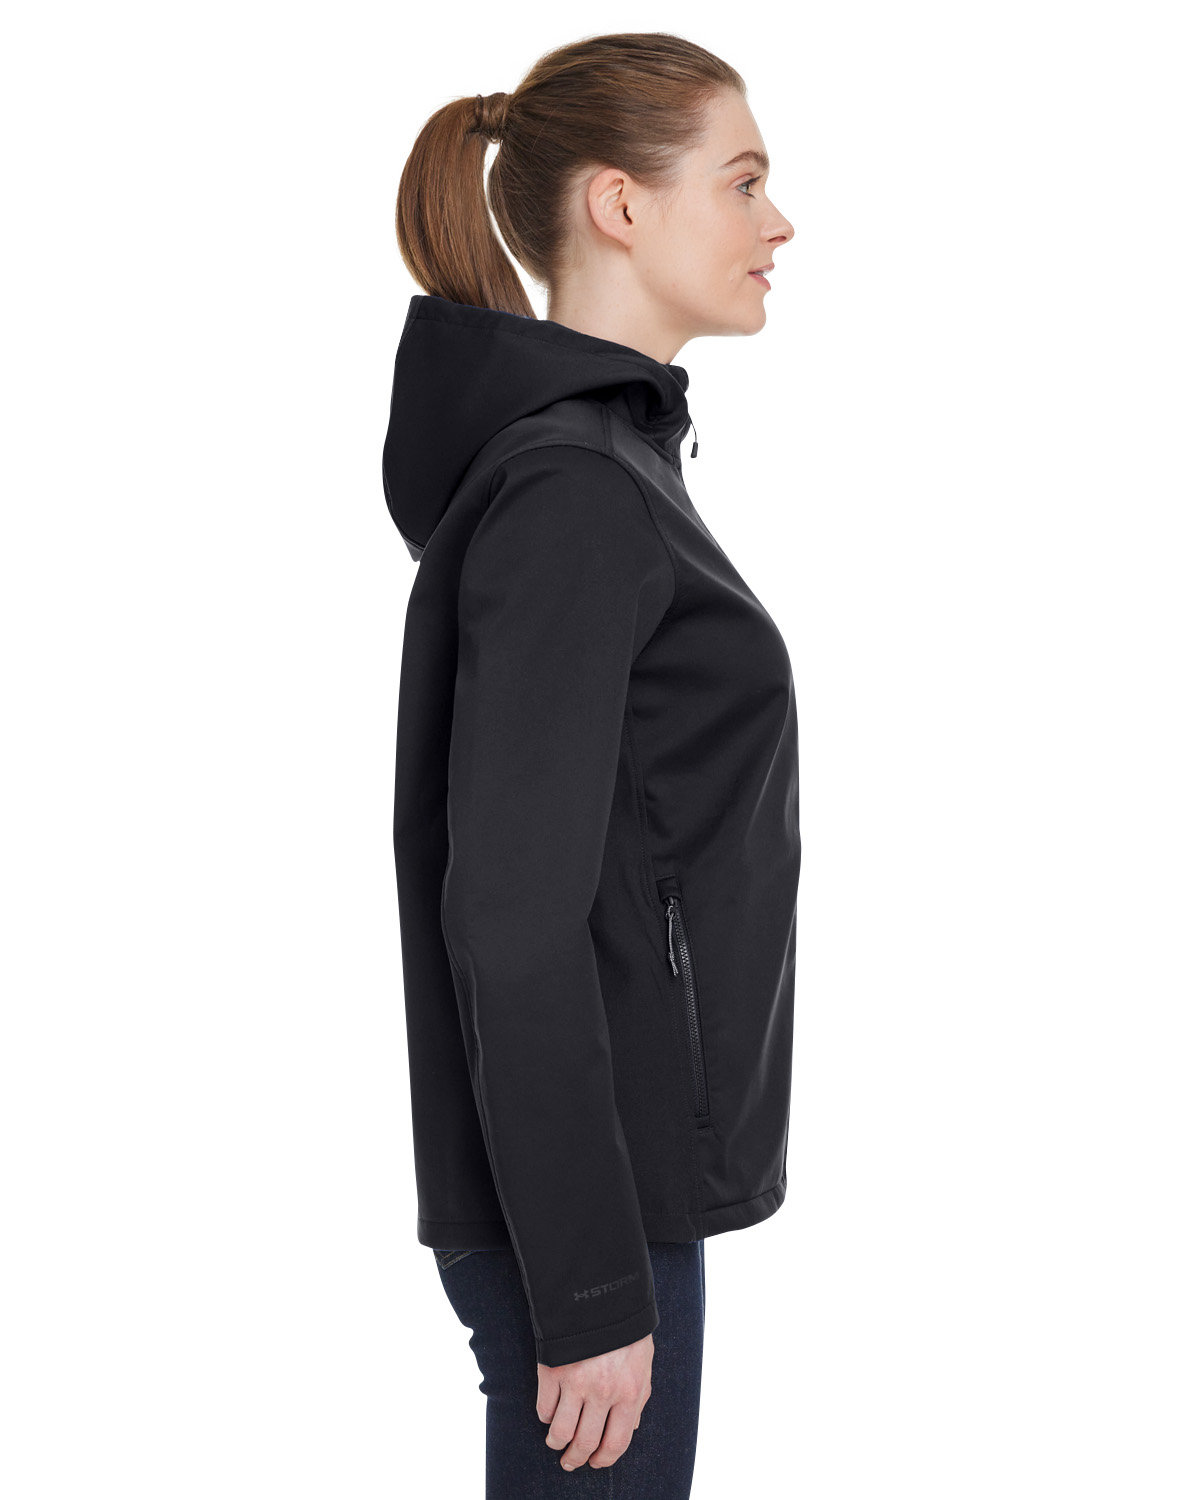 jacket Under Armour ColdGear Infrared Shield 2.0 - Black/Pitch Gray -  women´s 